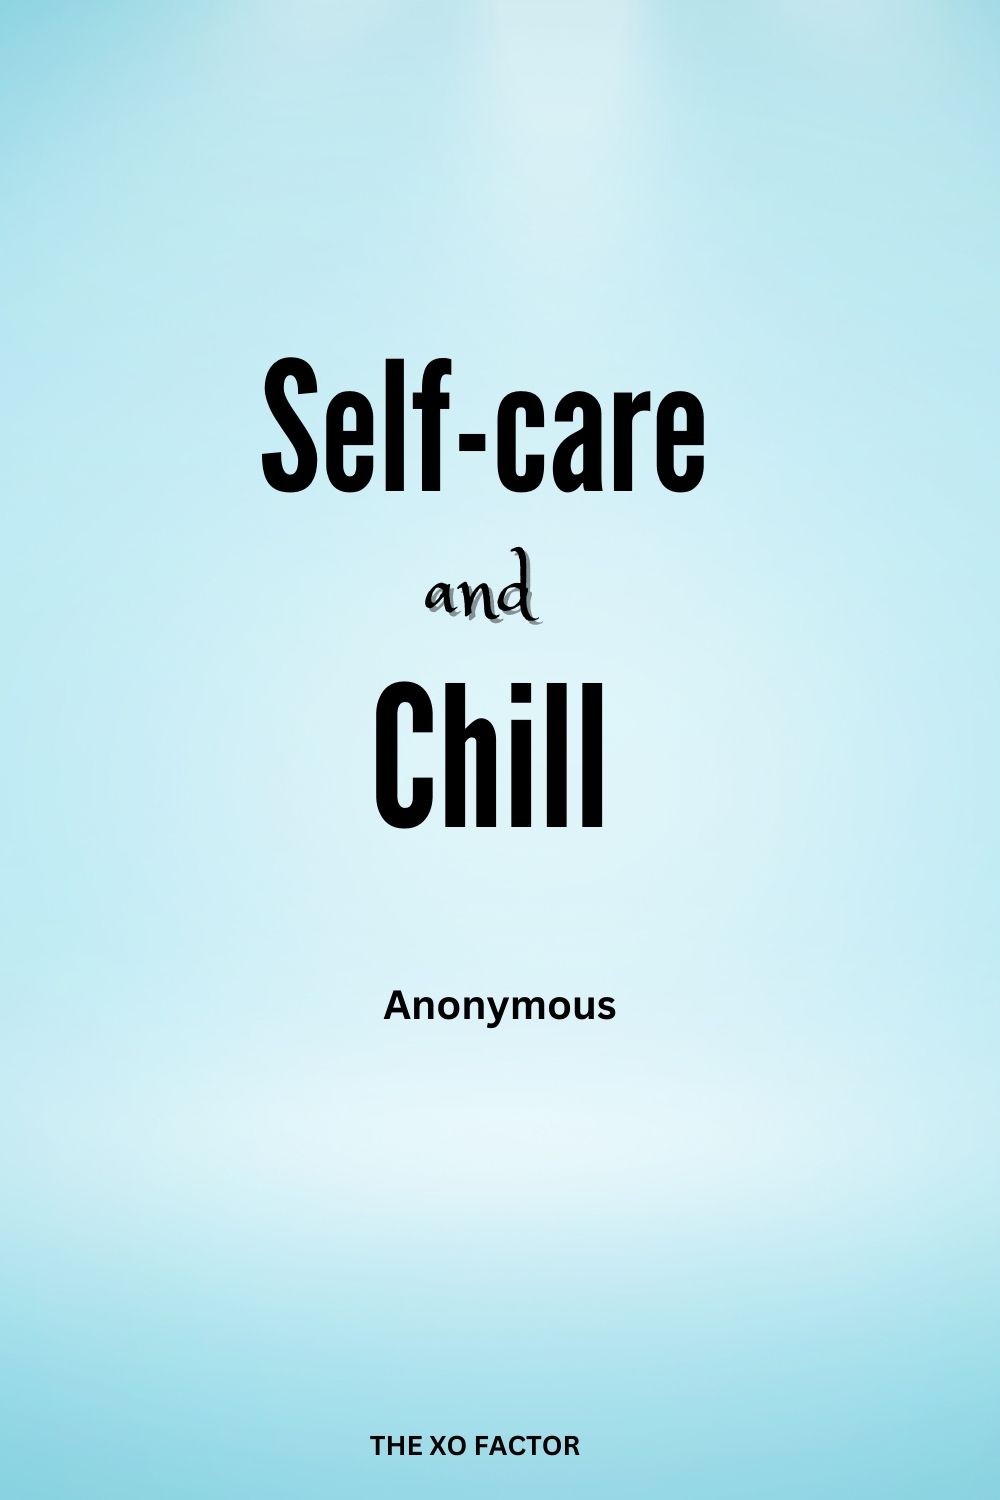 Self-care and chill.
Anonymous